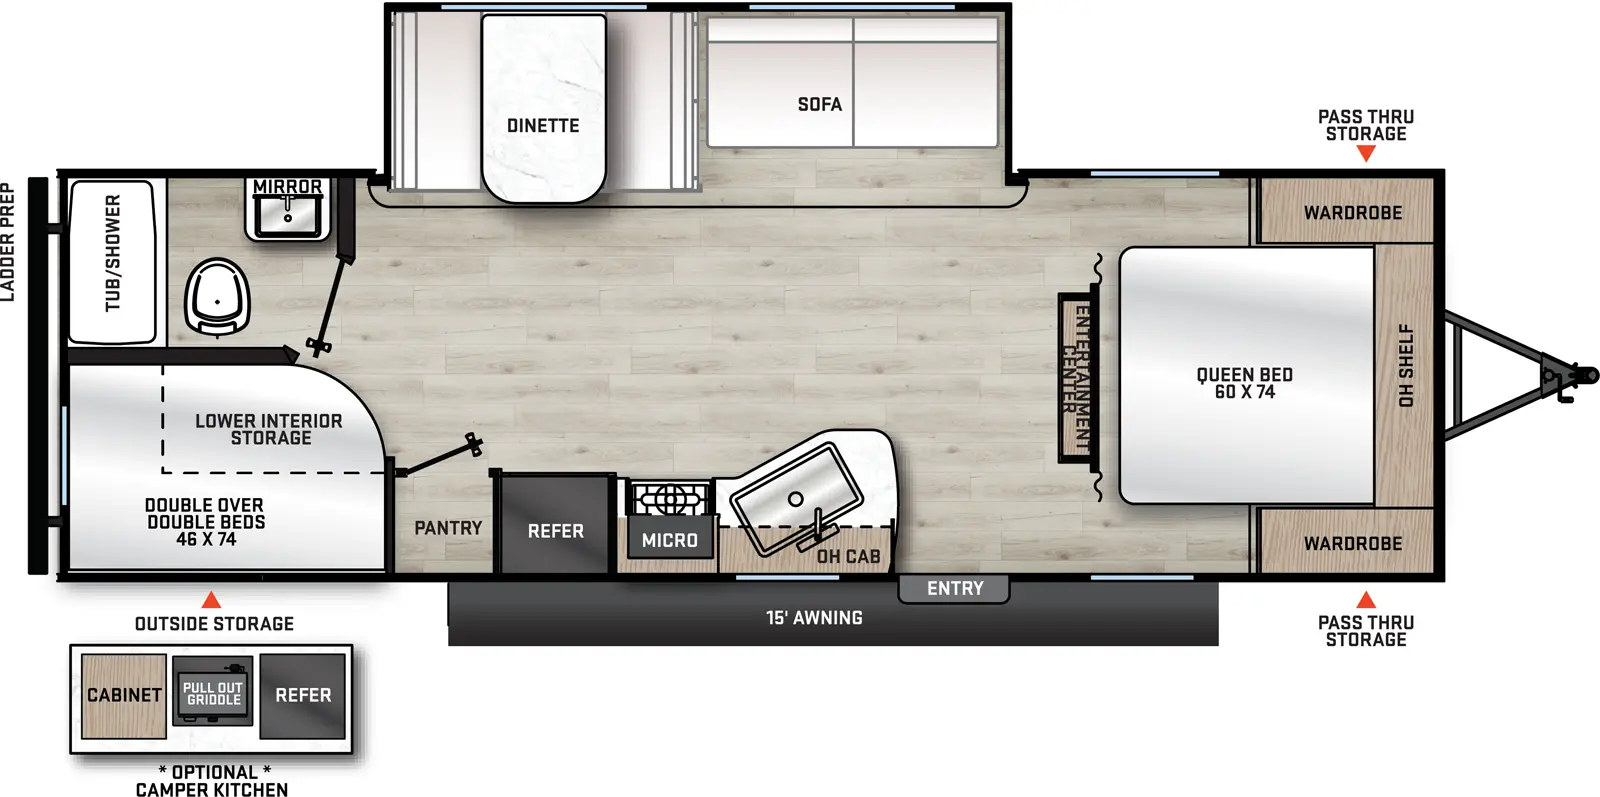 The 261BHS has one slide out and one entry. Exterior features a 15 foot awning, rear outside storage, and front pass thru storage. Interior layout front to back: foot facing queen bed with overhead shelf and night stands on each side; island entertainment center along inner wall; off-door side slideout with sofa and dinette; door side entry, kitchen counter with sink, overhead cabinet, microwave, cooktop, refrigerator, and pantry; rear door side double over double bunks; rear off-door side full bathroom. 